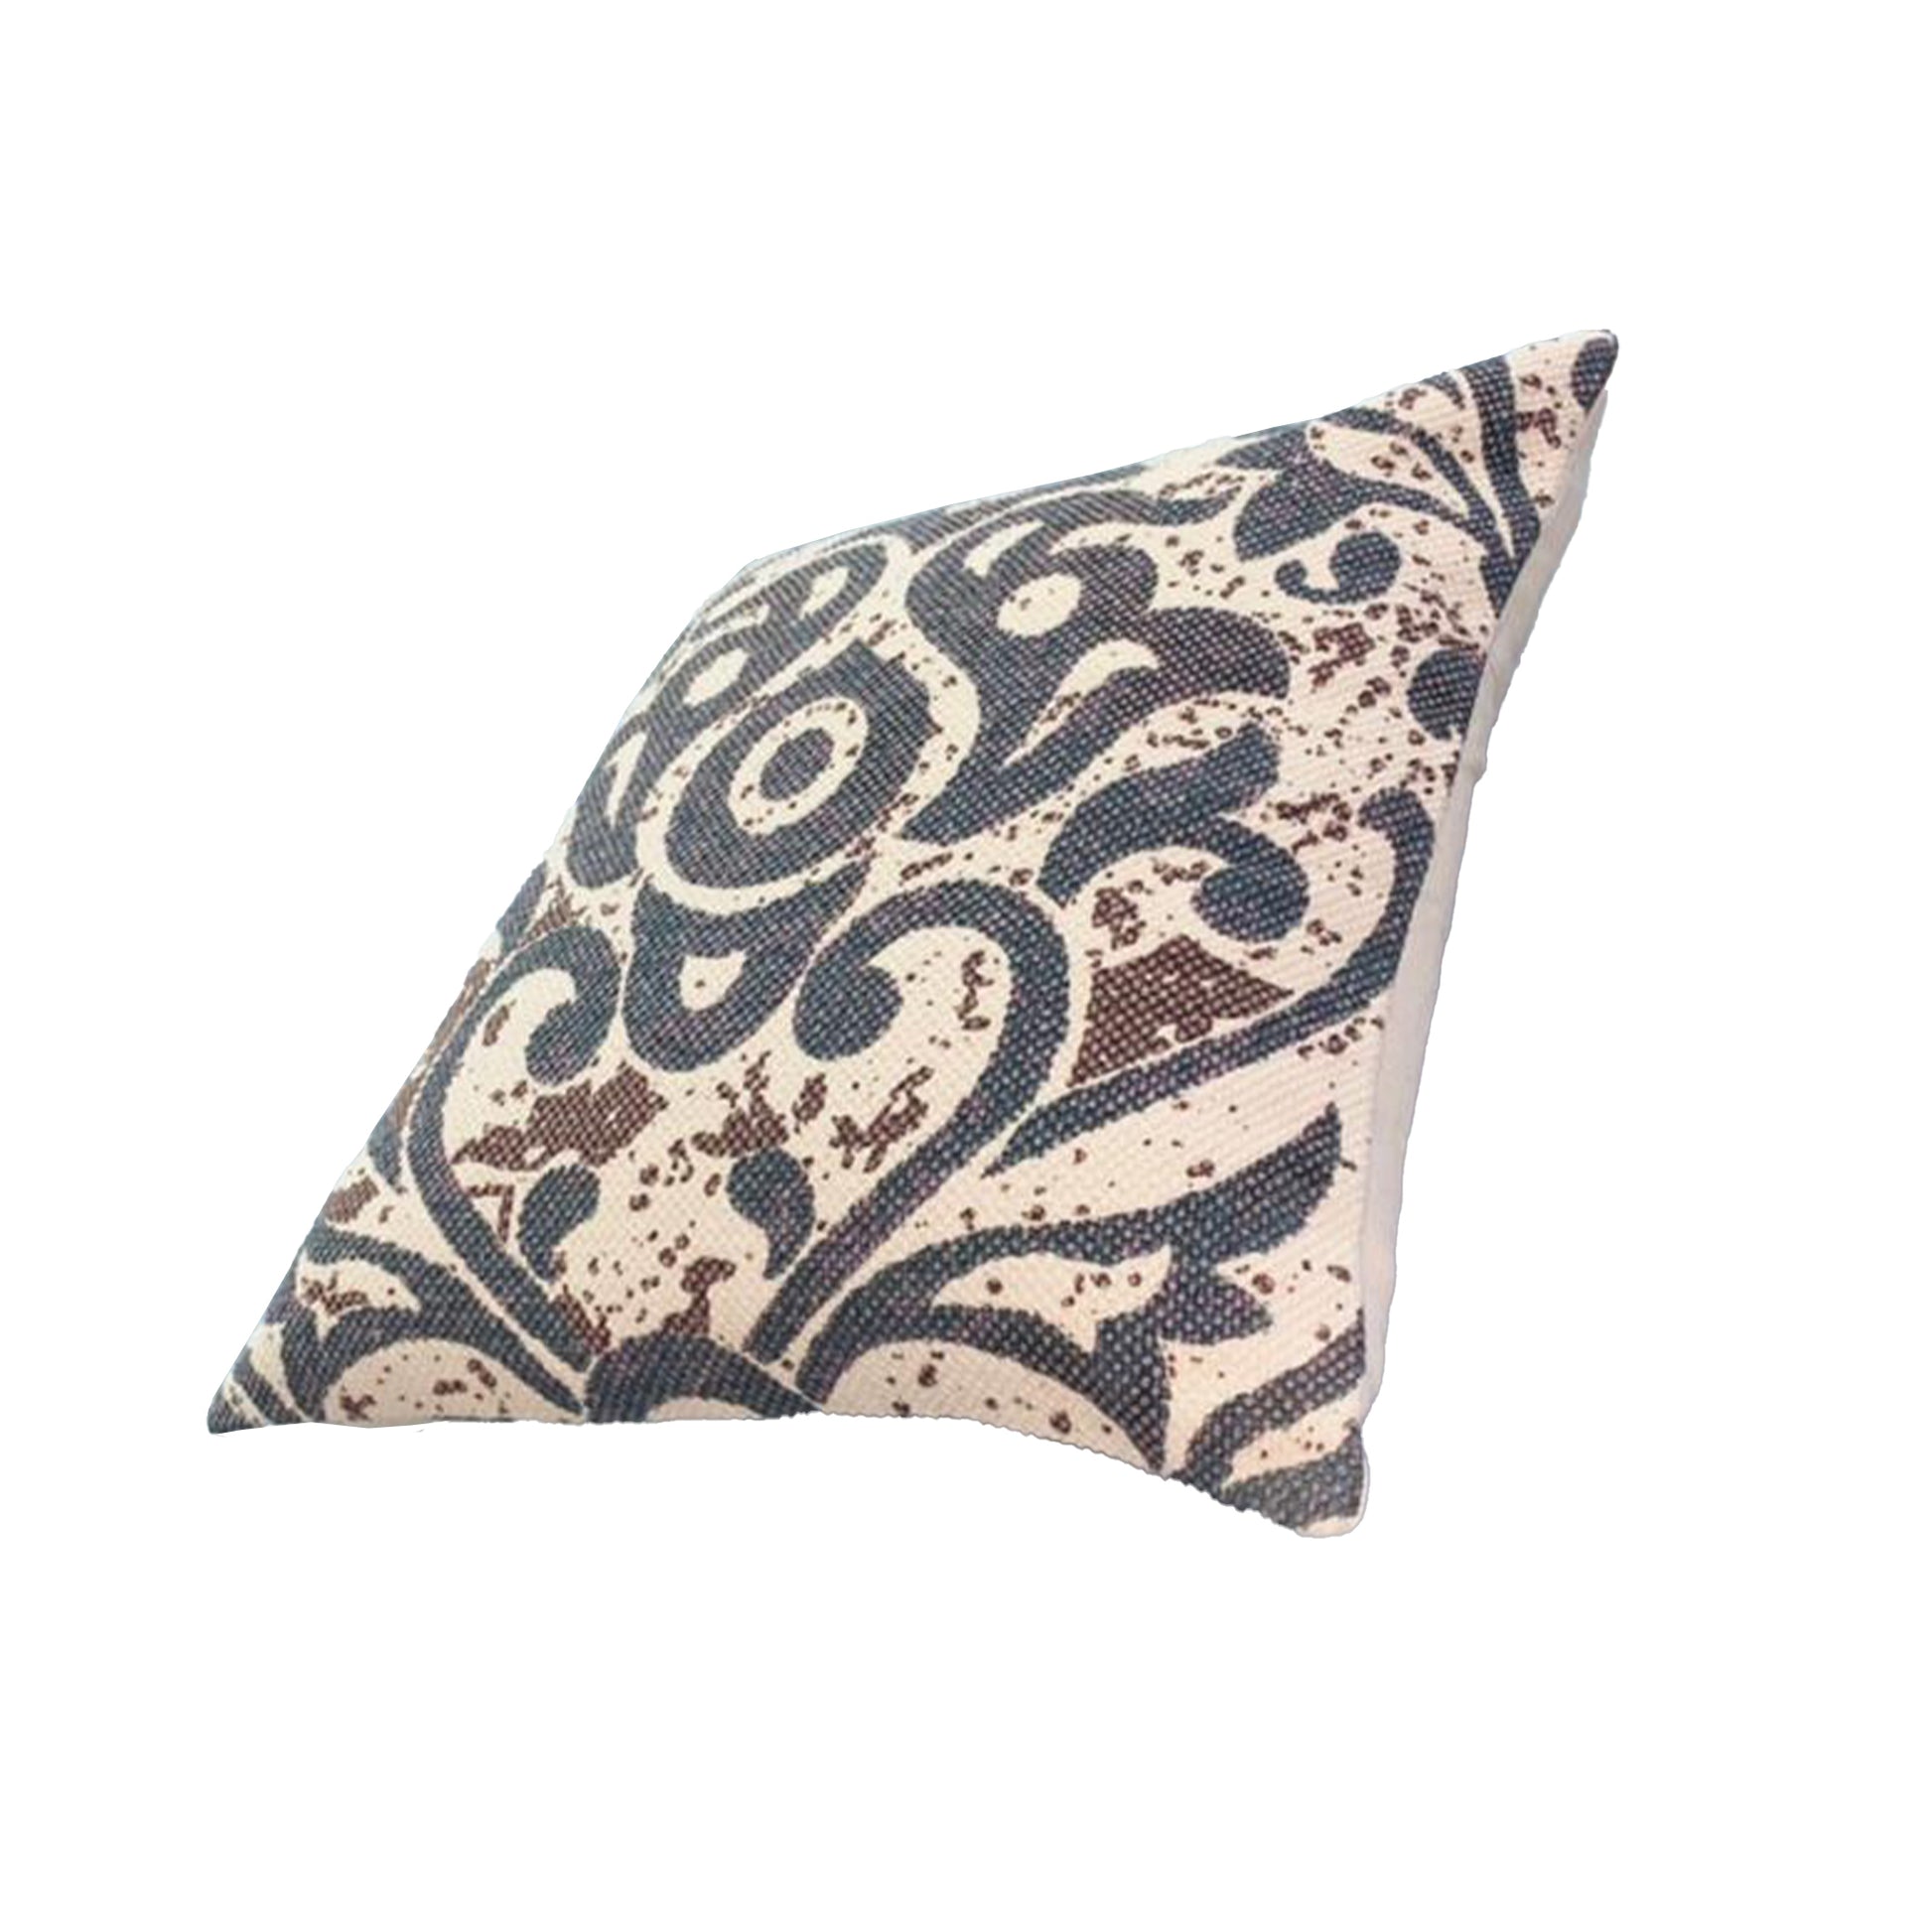 18 x 18 Square Accent Throw Pillow, Damask Print, Soft ivory-cotton